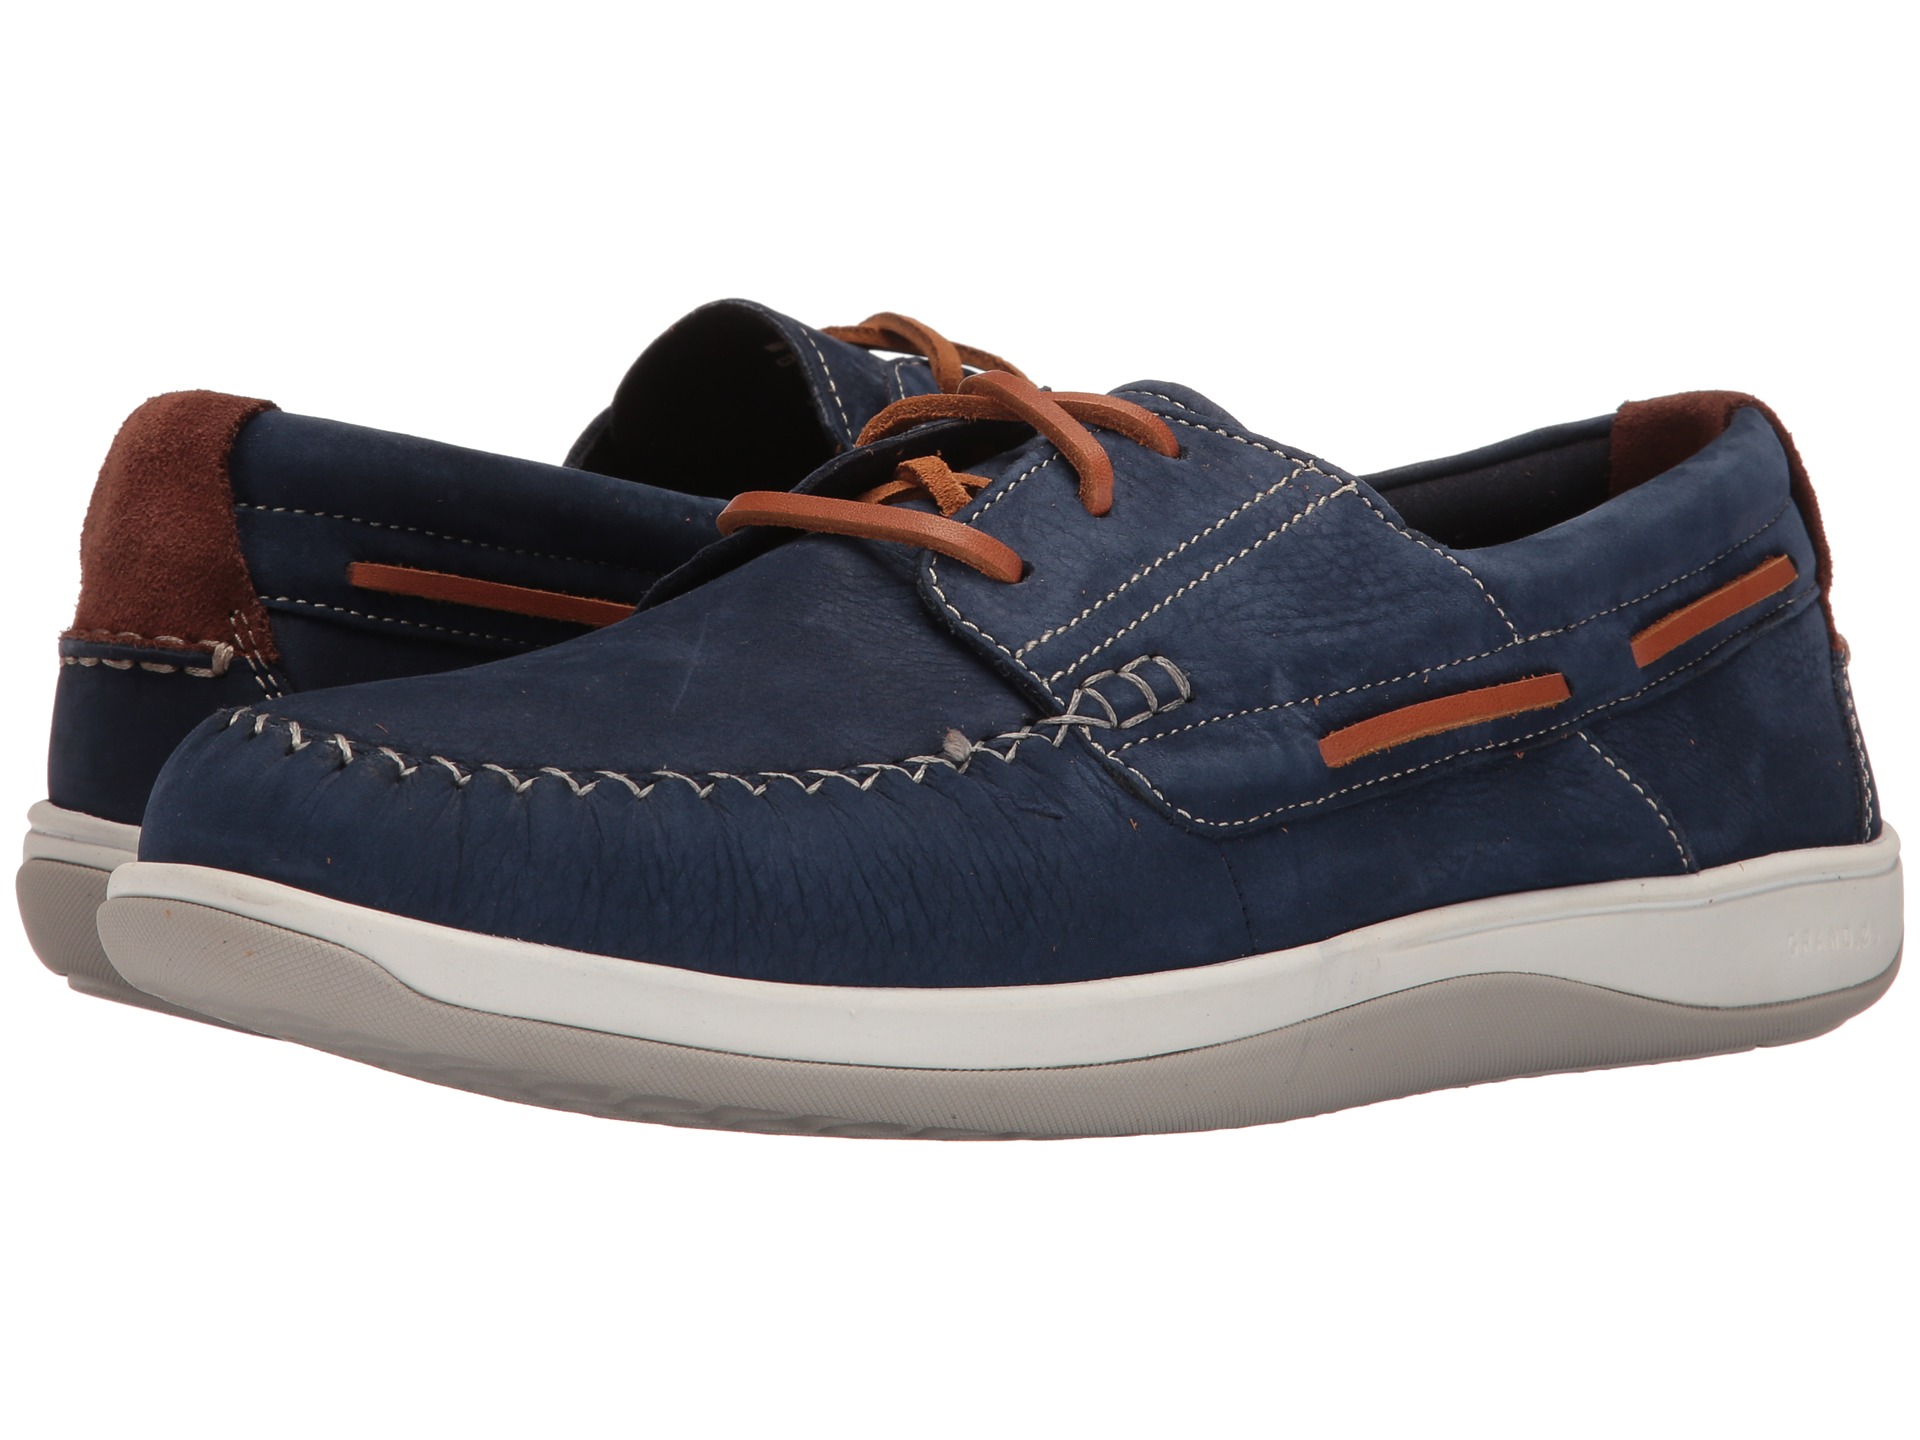 Cole Haan Boothbay Boat Shoe at